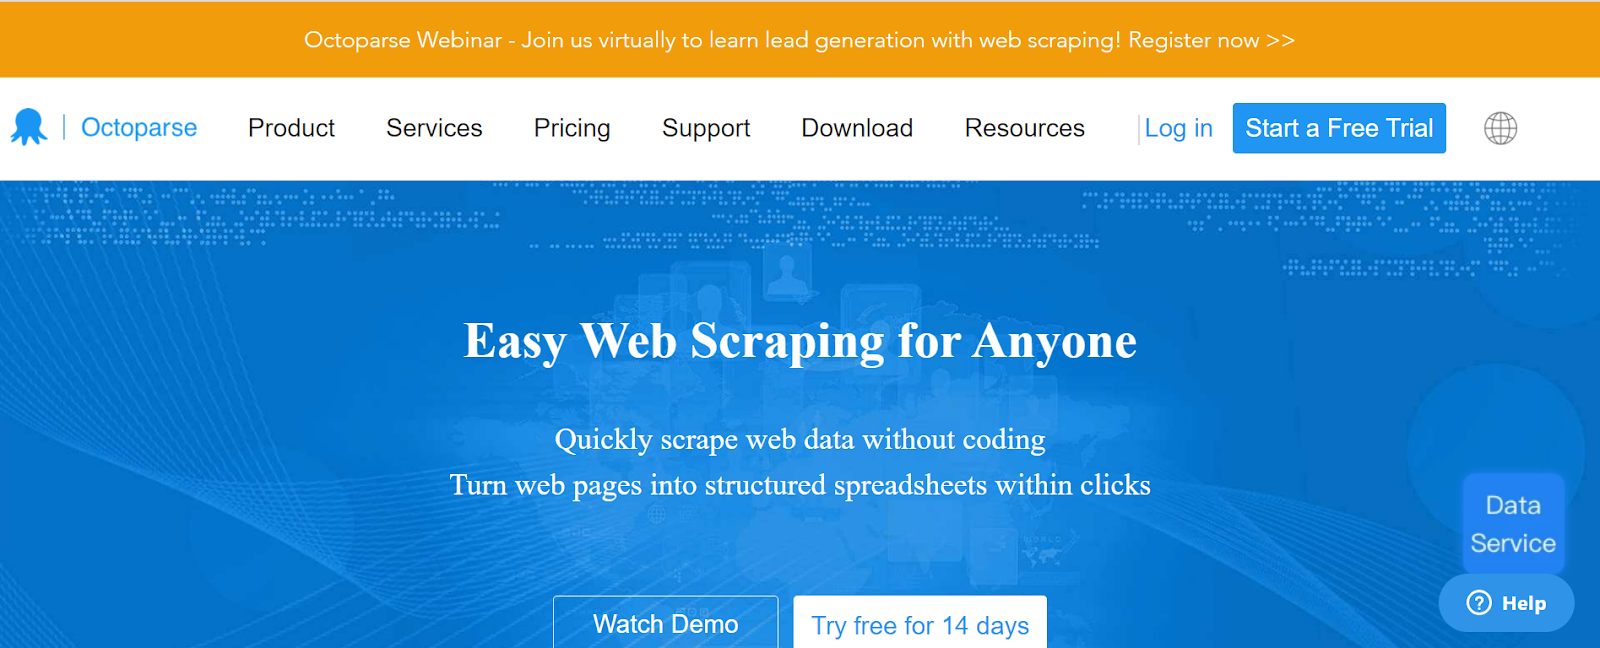 Home page of Octoparse